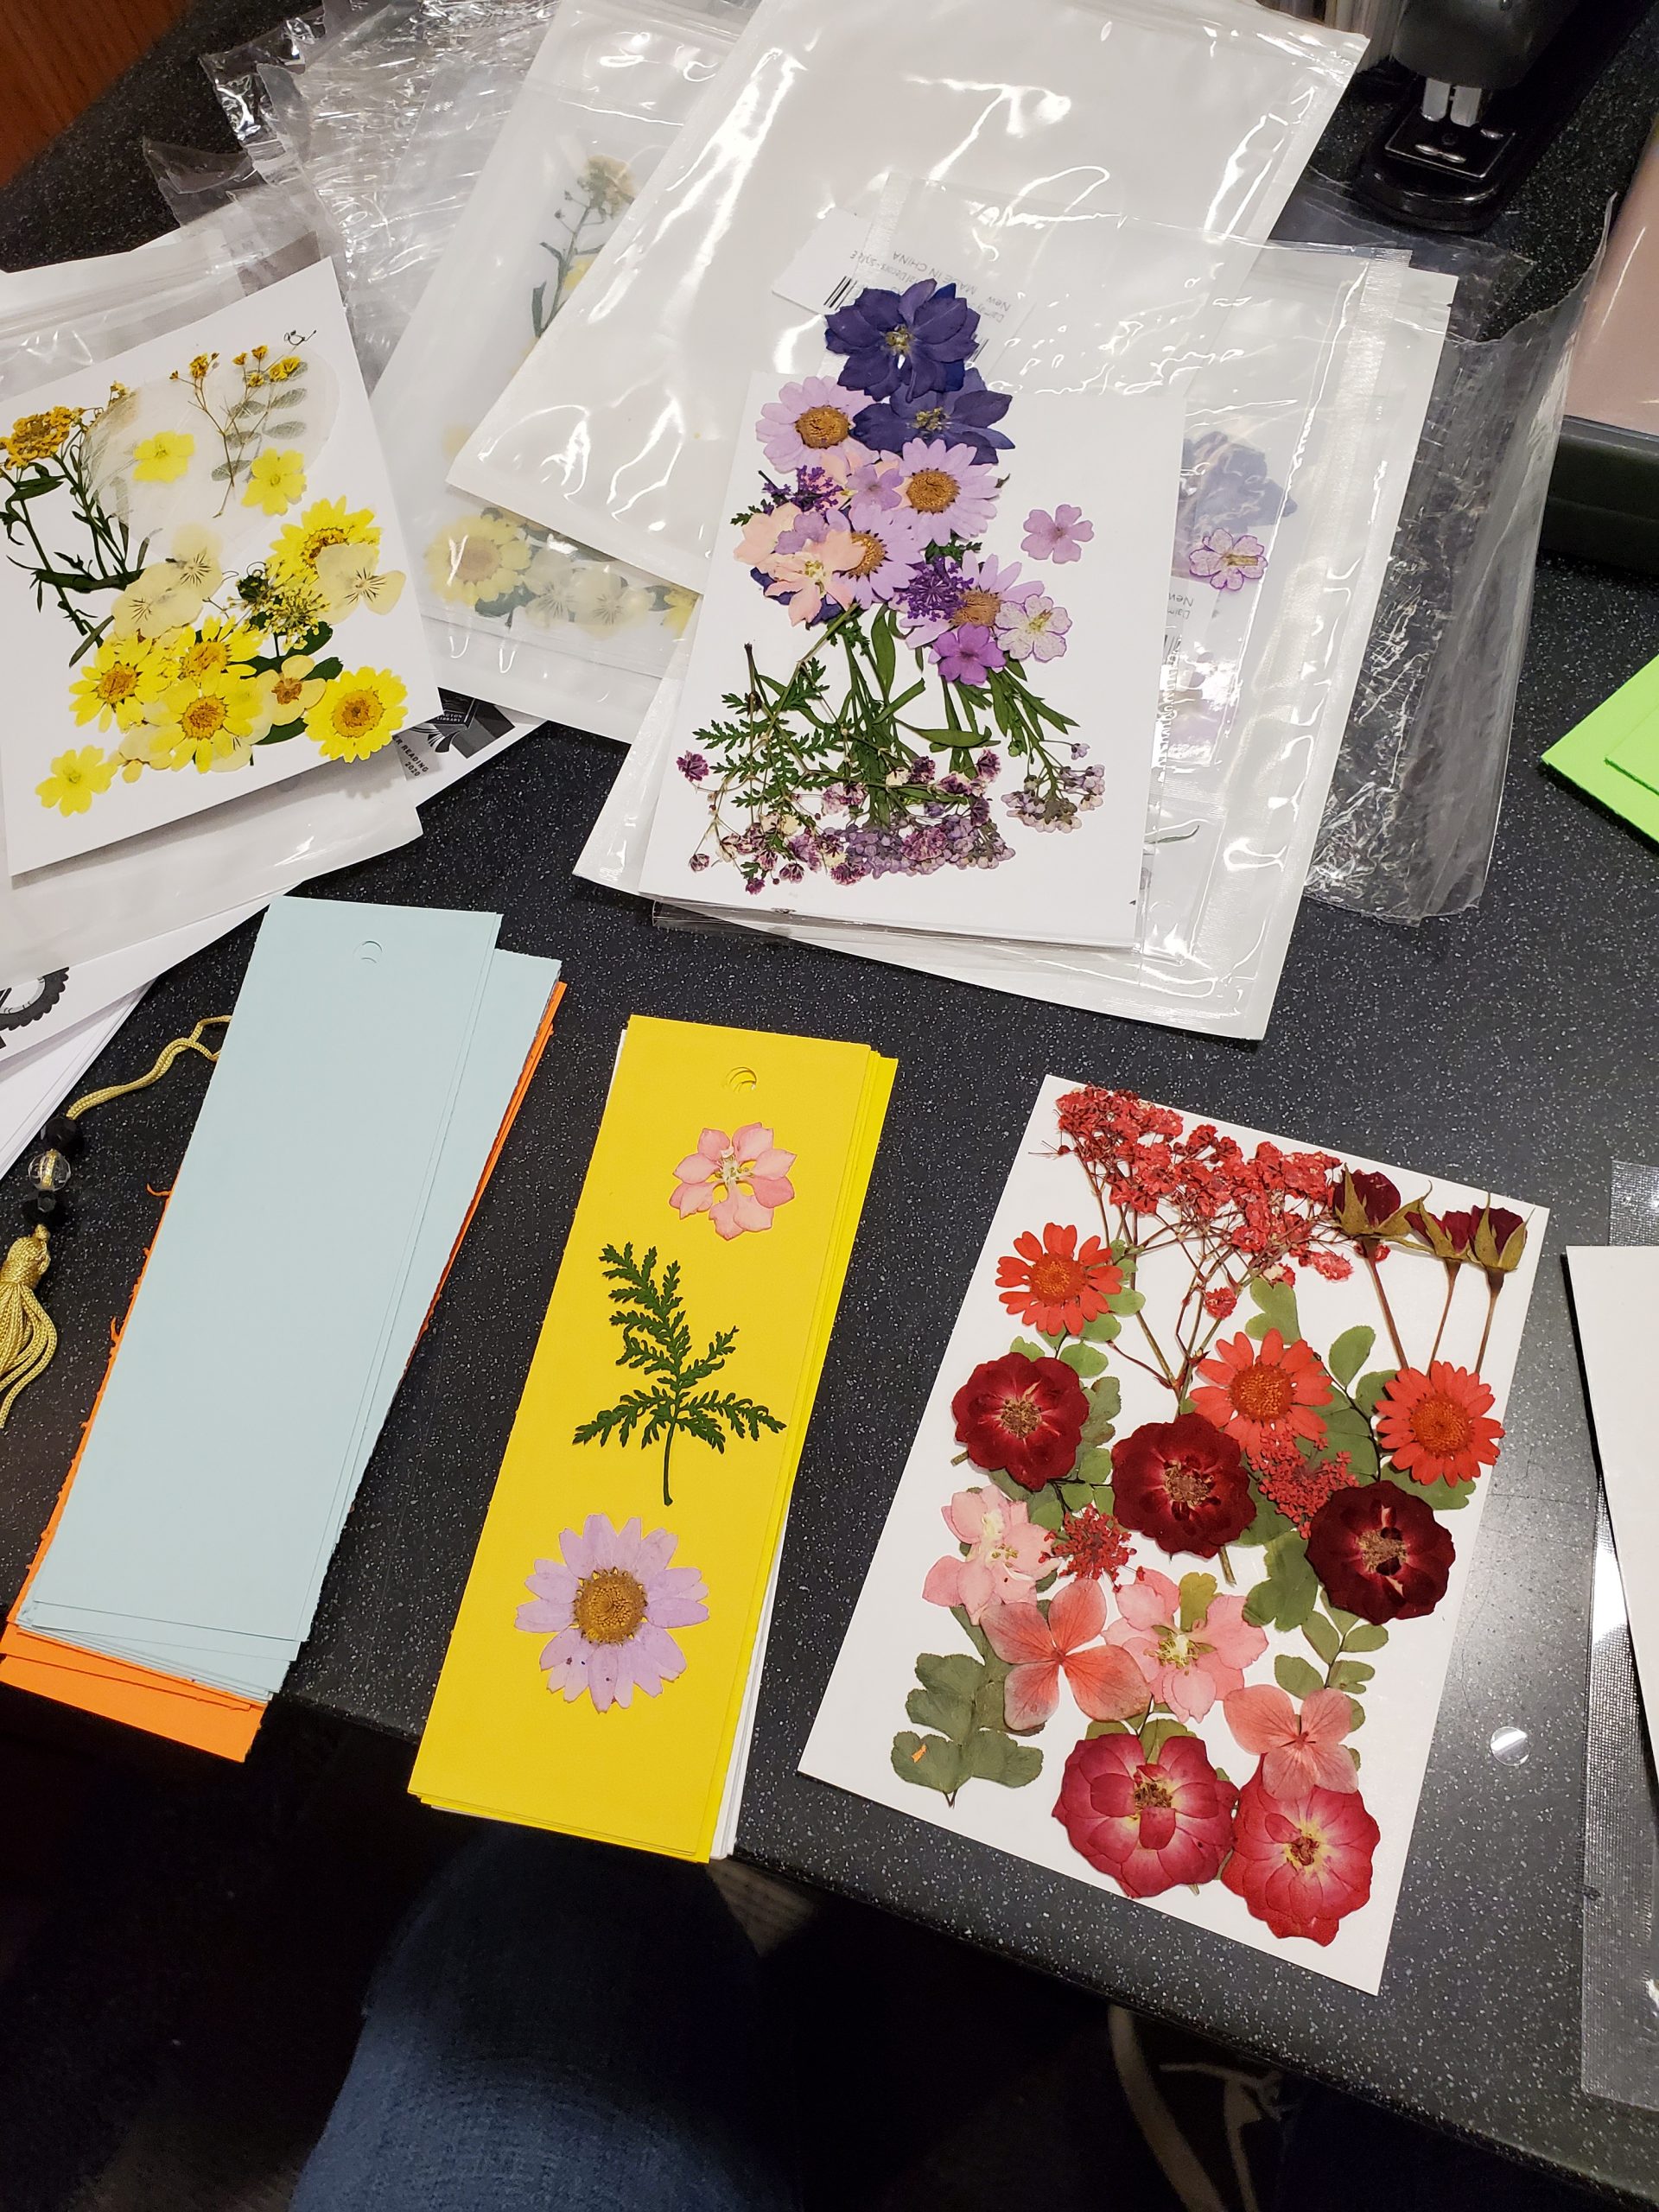 Learn How to Make your own Pressed Flower Bookmark with the